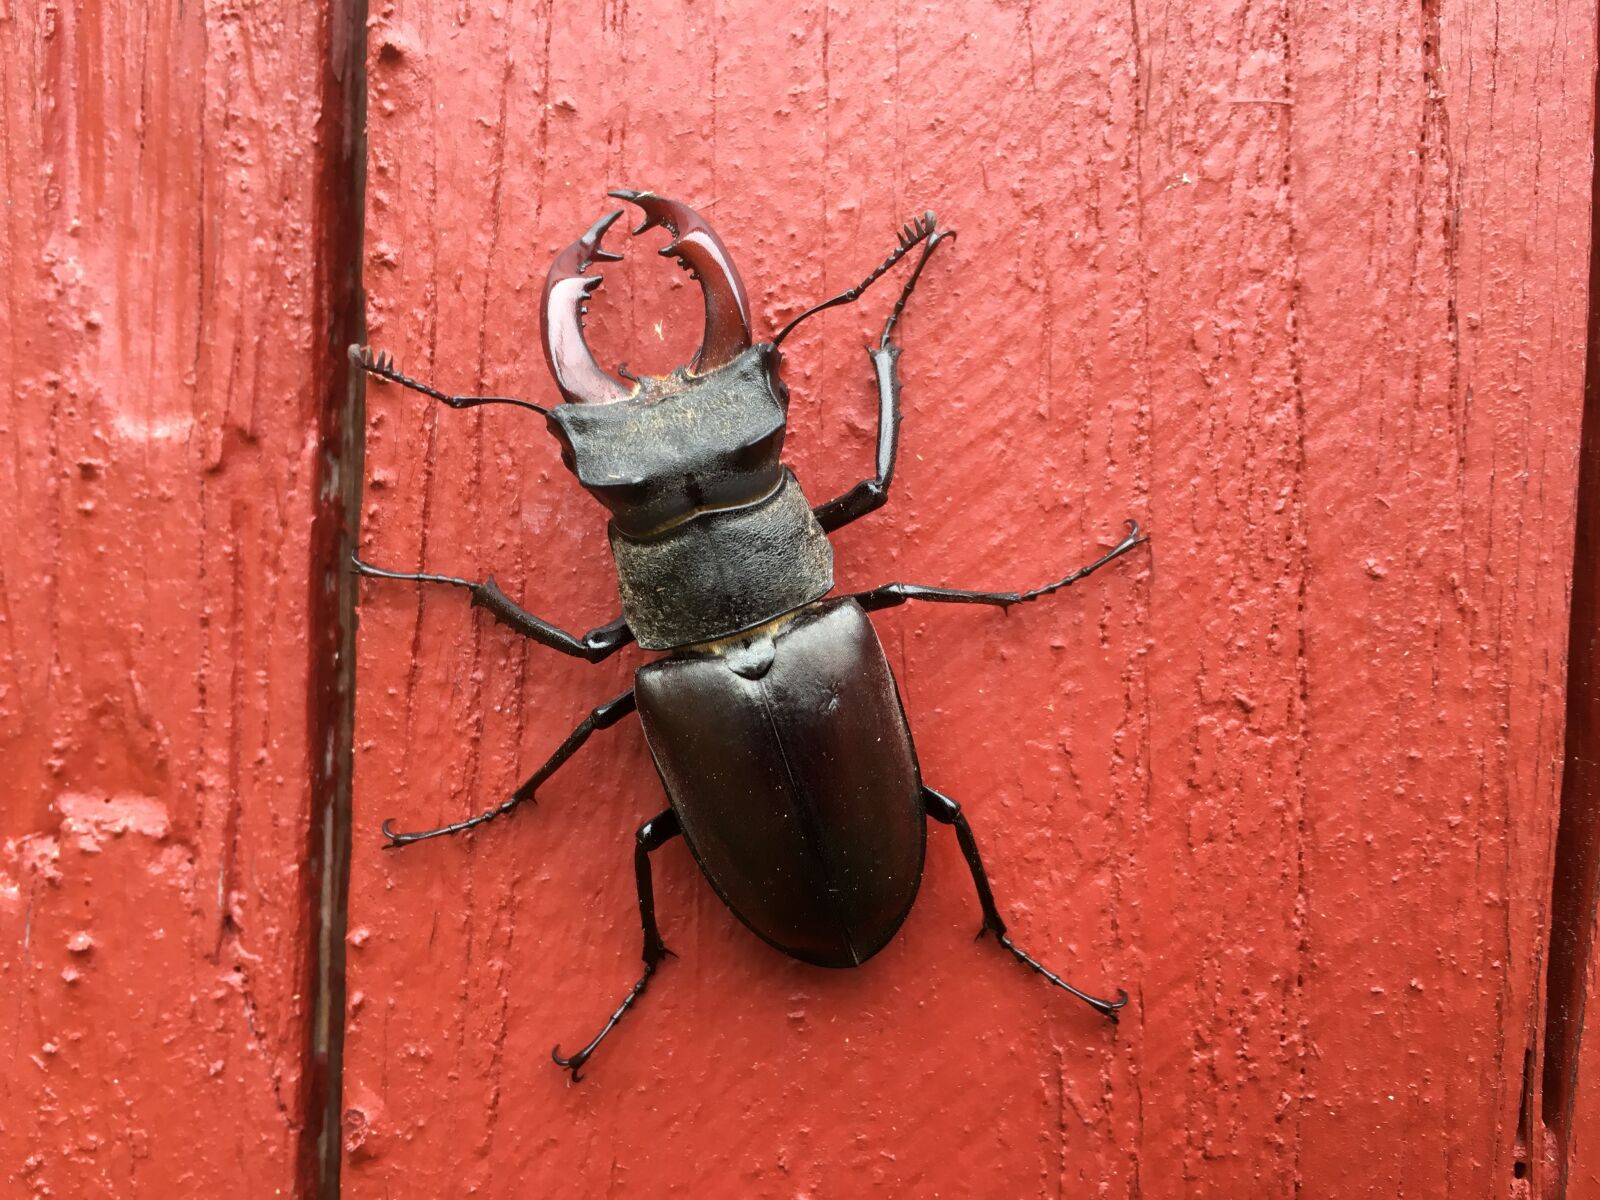 Apple iPhone 6s sample photo. Stag beetle, insect, nature photography